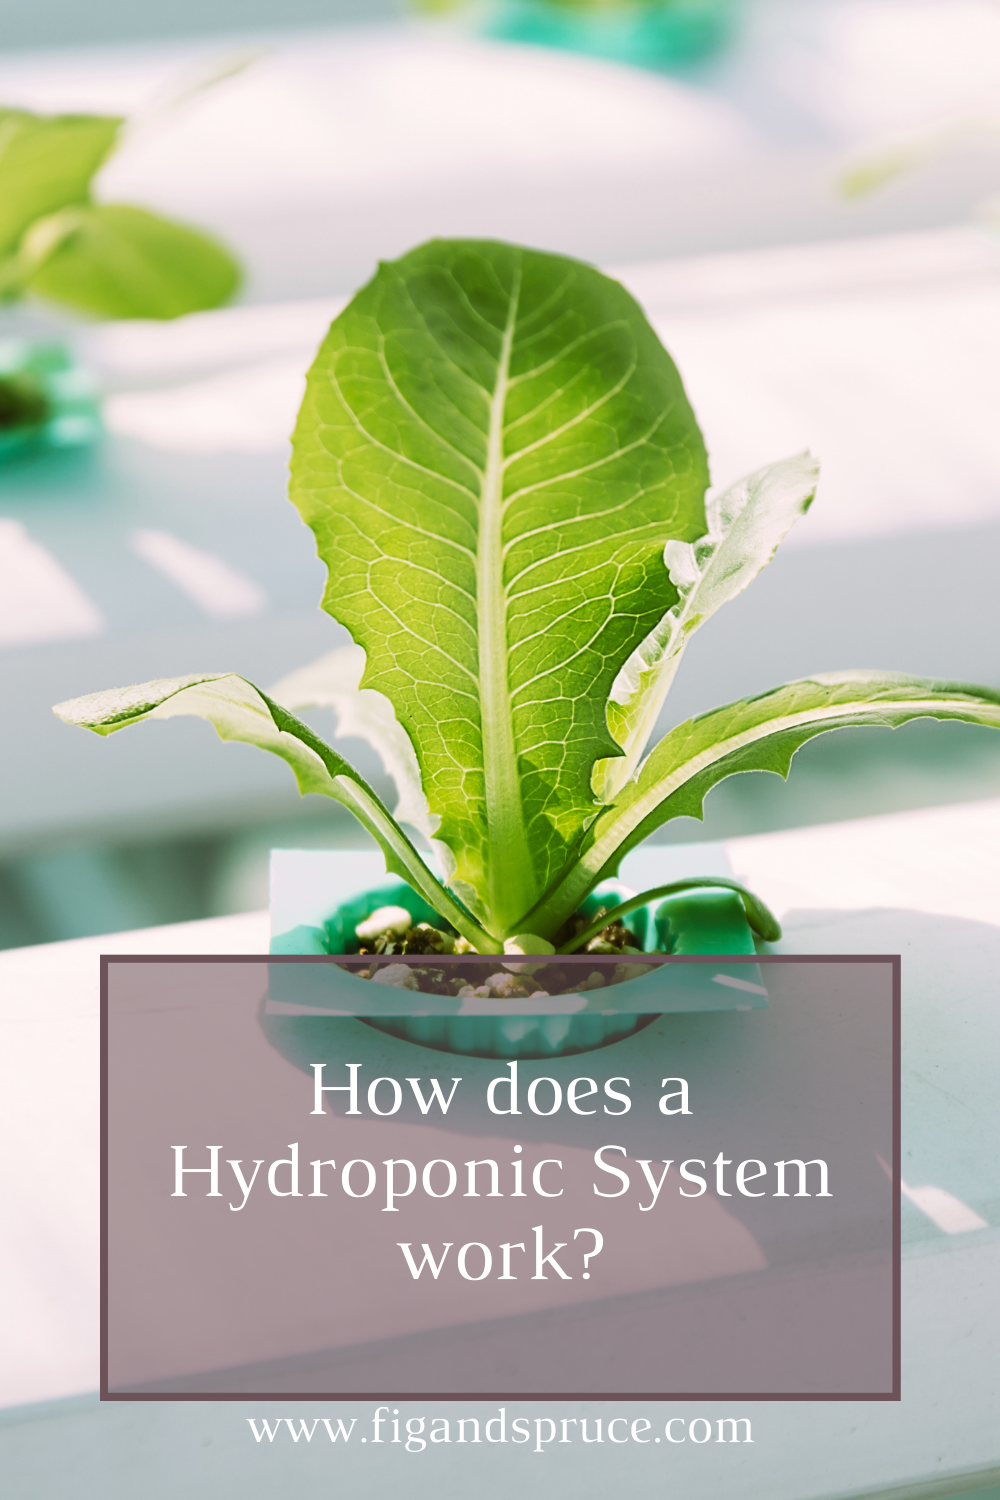 How Does a Hydroponic System Work?